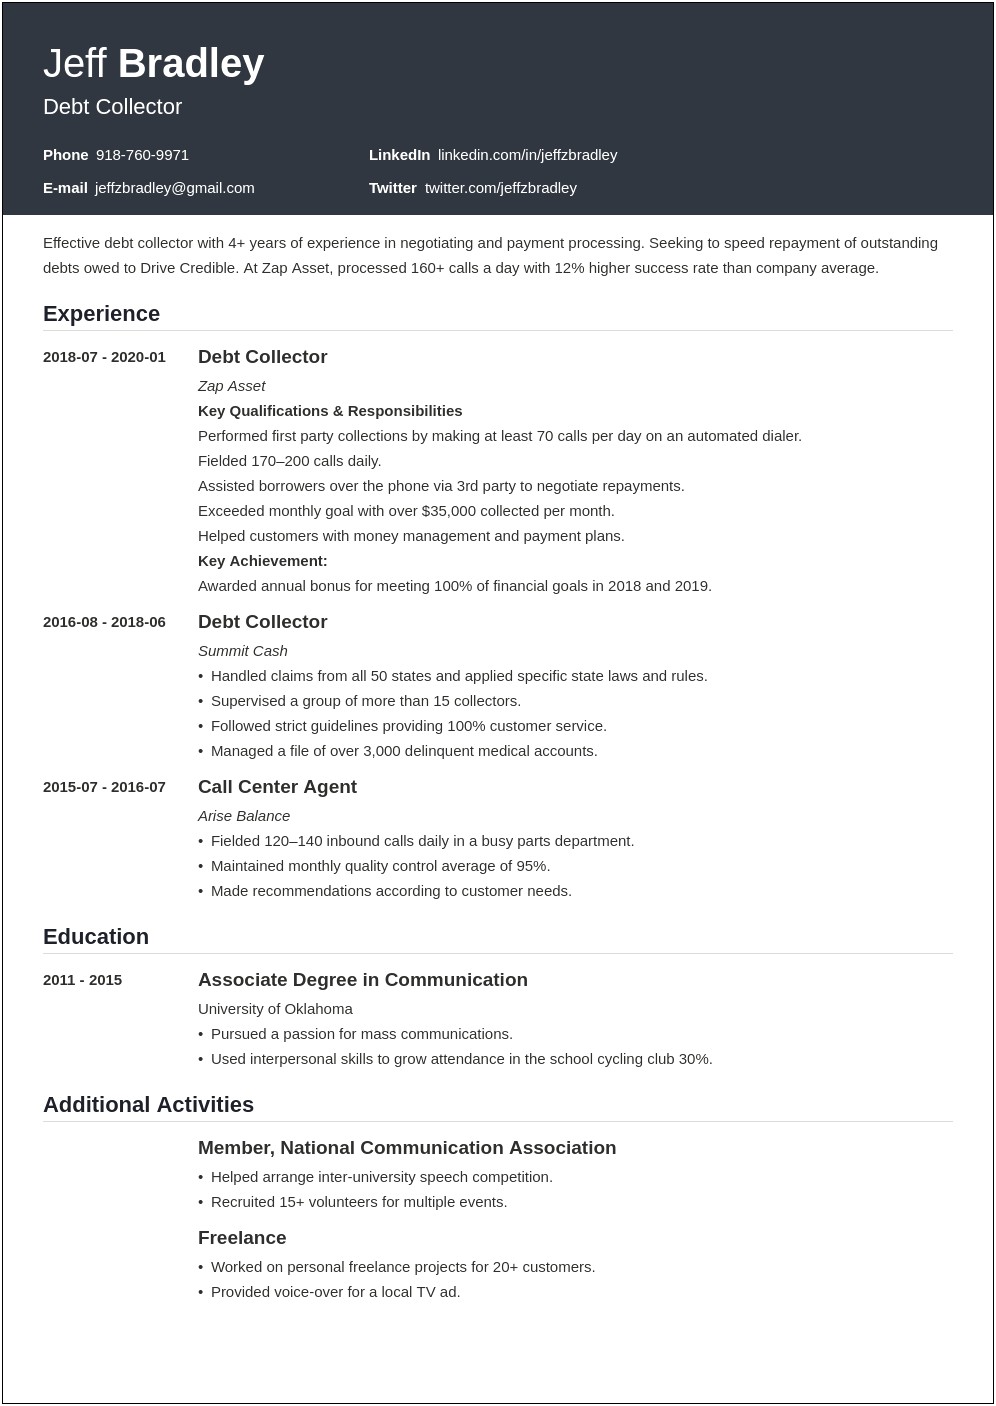 Sample Resume Description For Collections